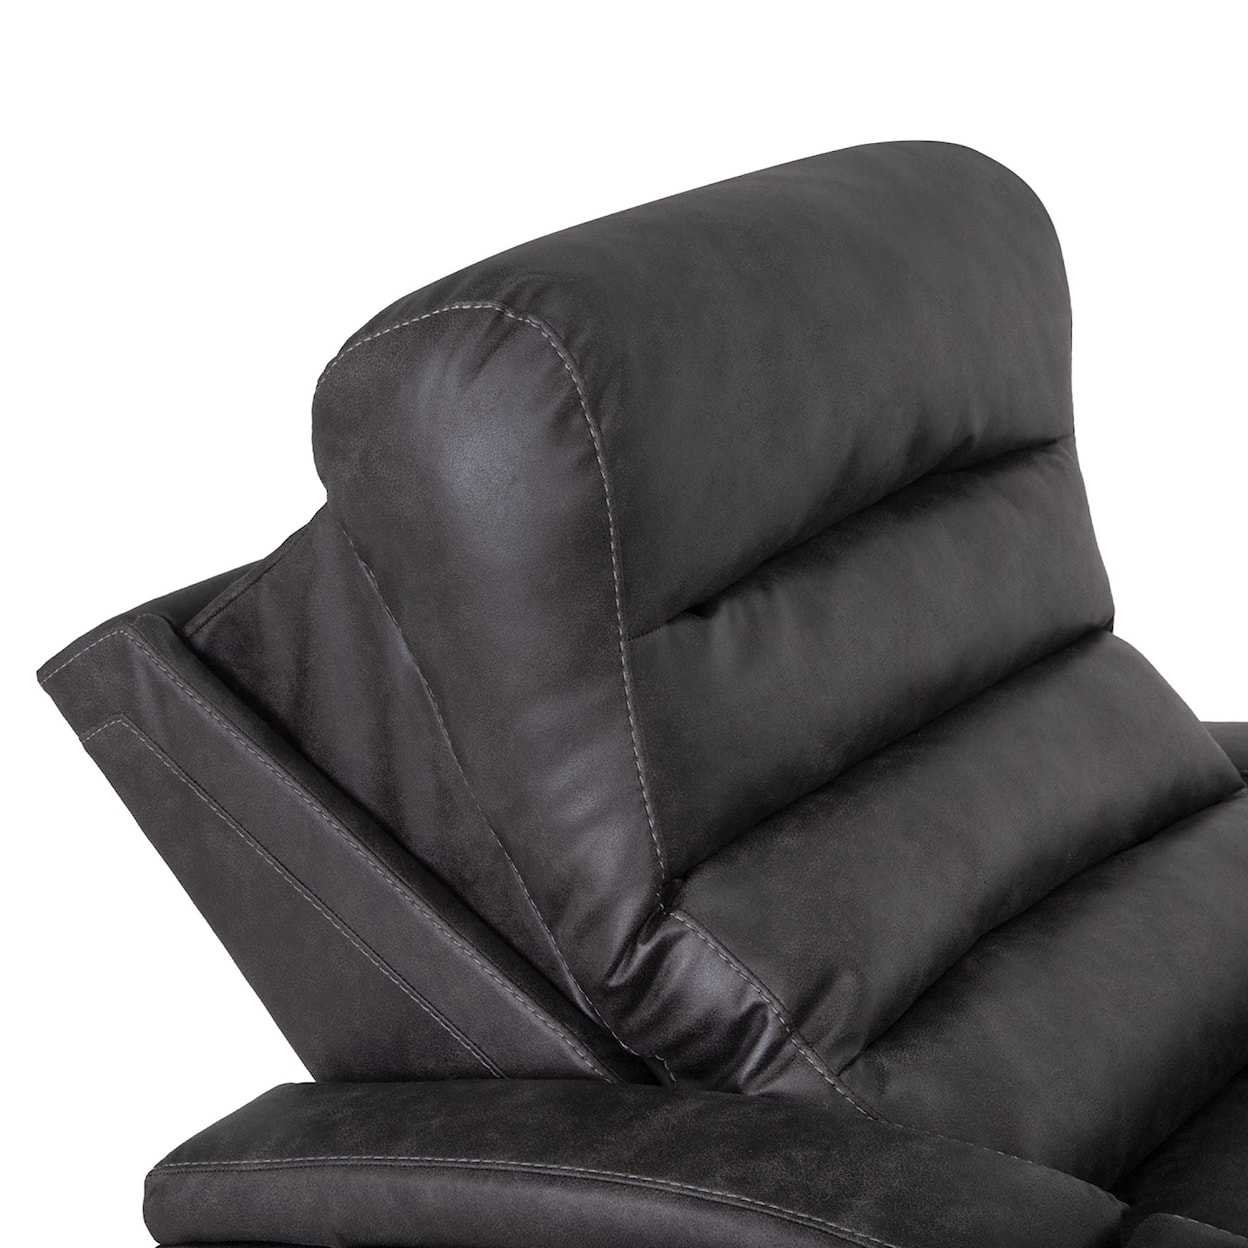 Franklin 7444 Tipton Home Theater Recliner